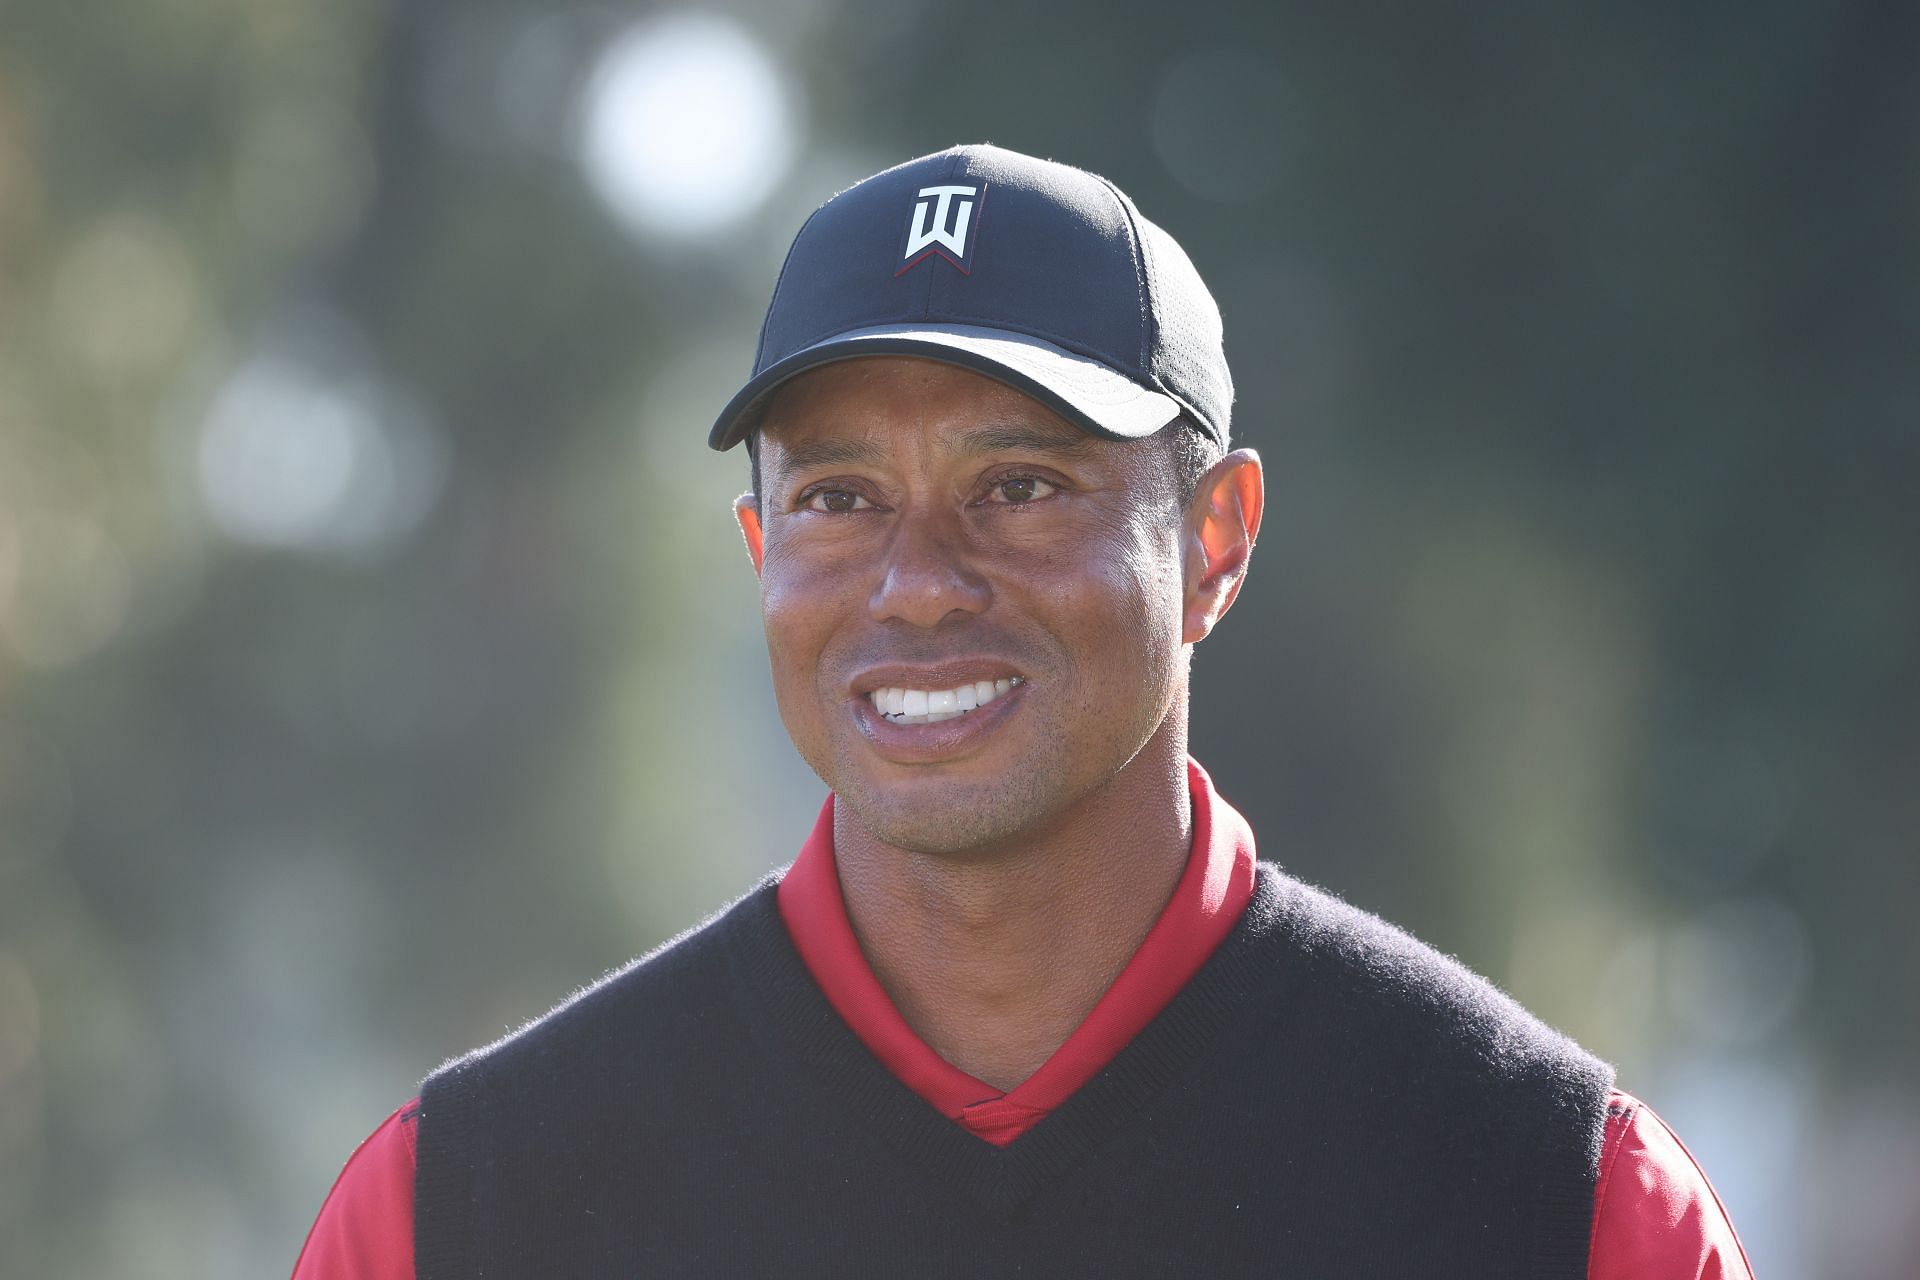 Tiger Woods - The Genesis Invitational - Final Round